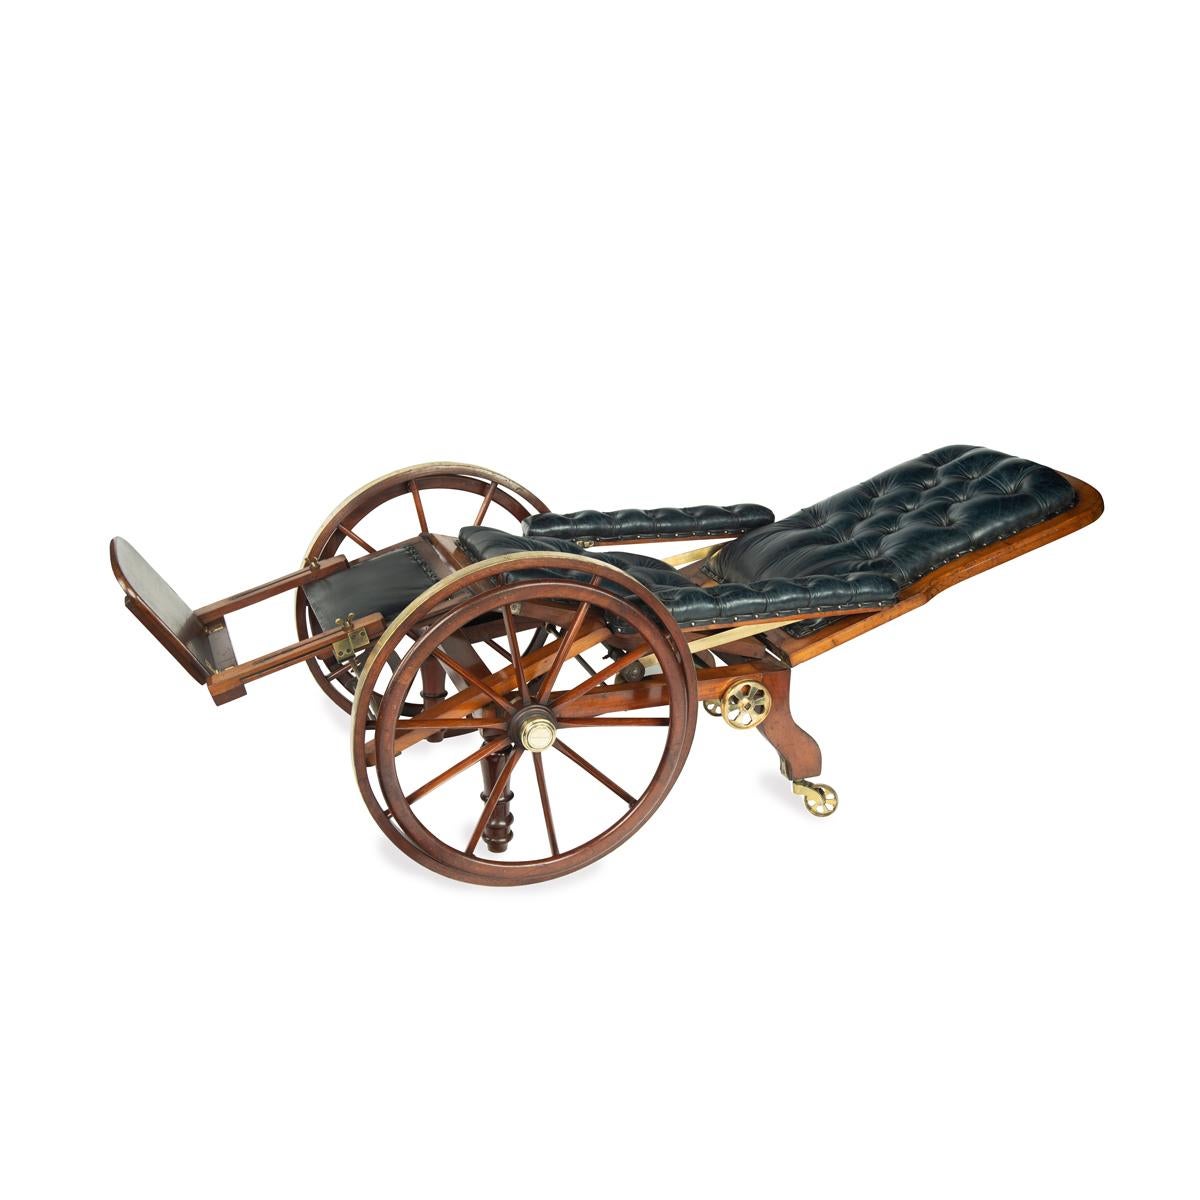 This mahogany wheel chair has a padded back, arms and seat, reupholstered in deep buttoned blue leather.  The brass-bound wheels have a secondary outer wheel, and a pair of smaller brass wheels which enable the chair to be reclined almost to the